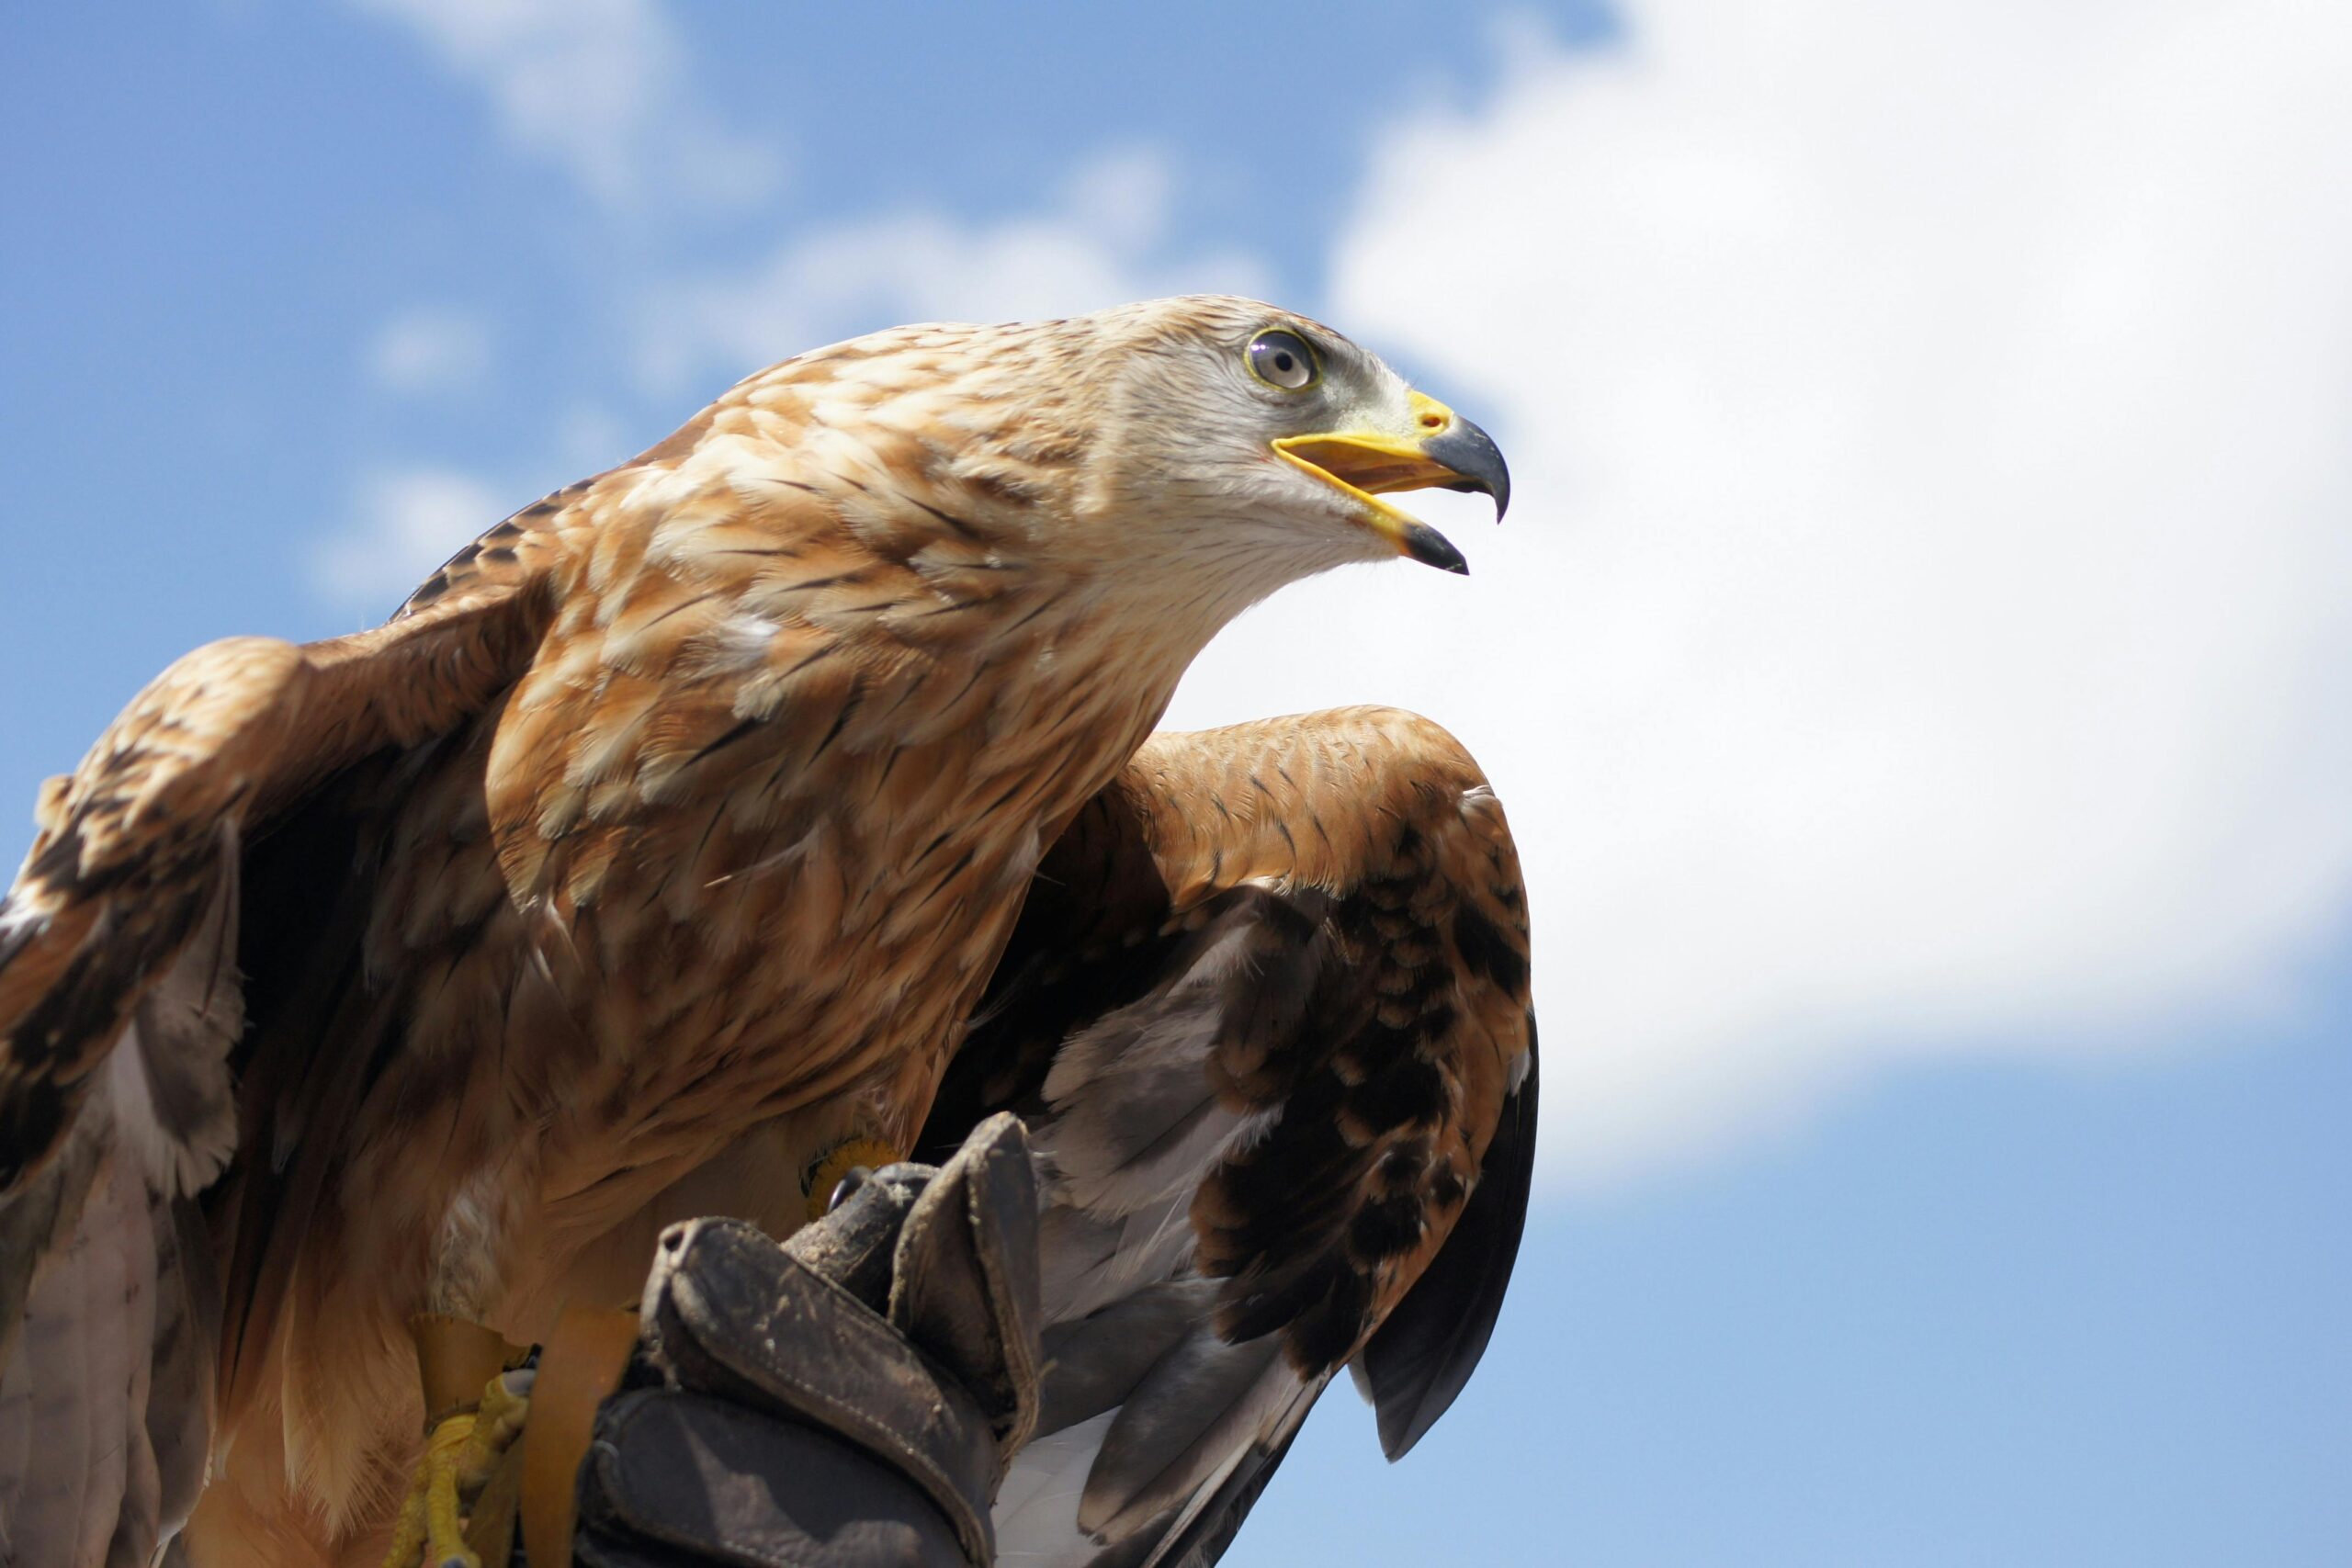 how much do Golden Eagles eat a day